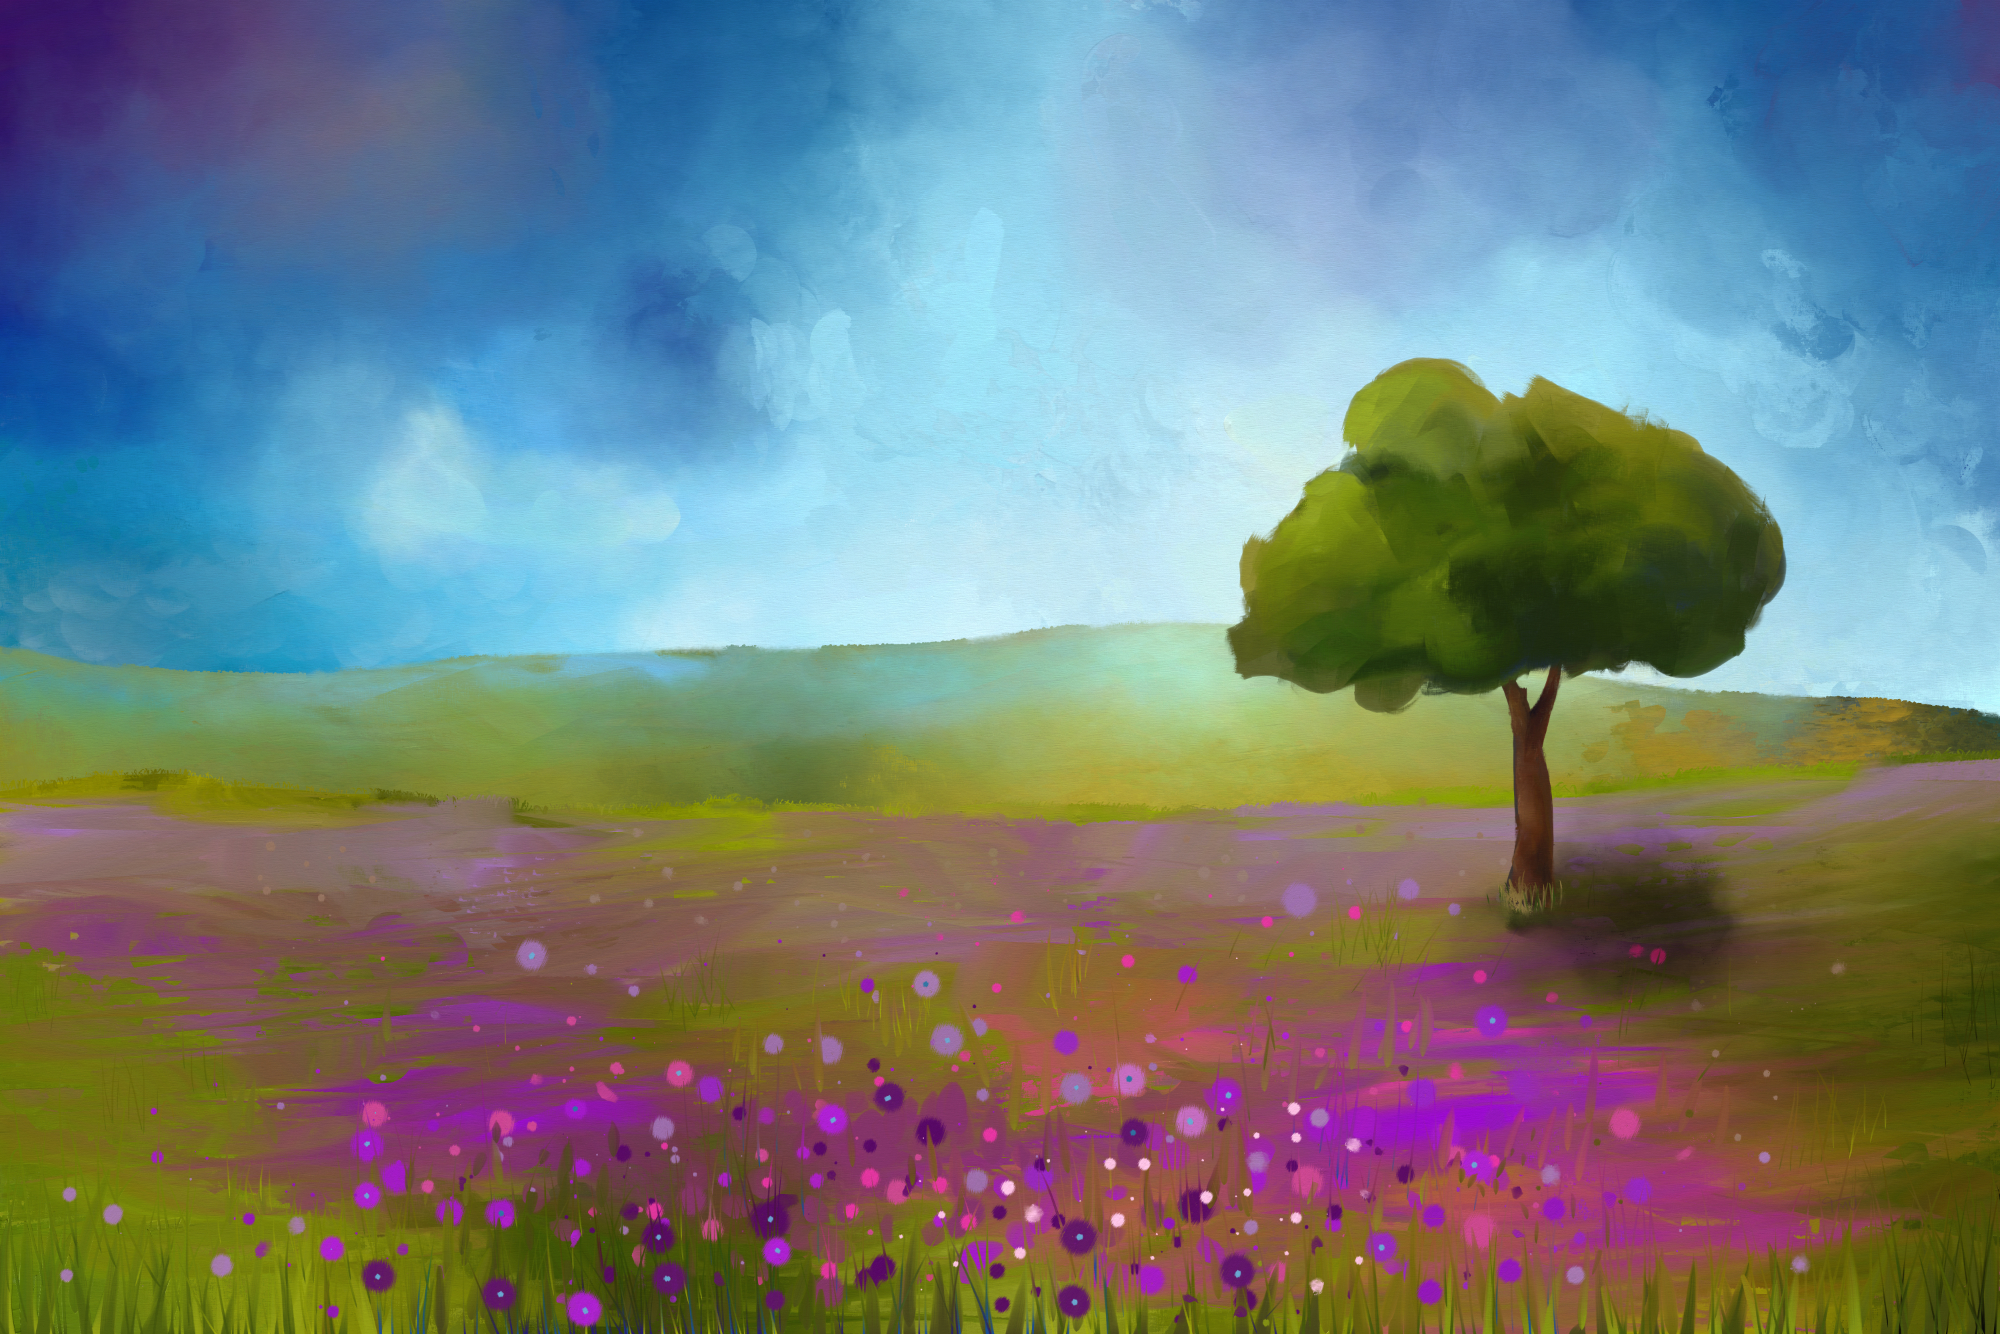 Digital painting of a landscape with purple flowers and a tree in a loose style